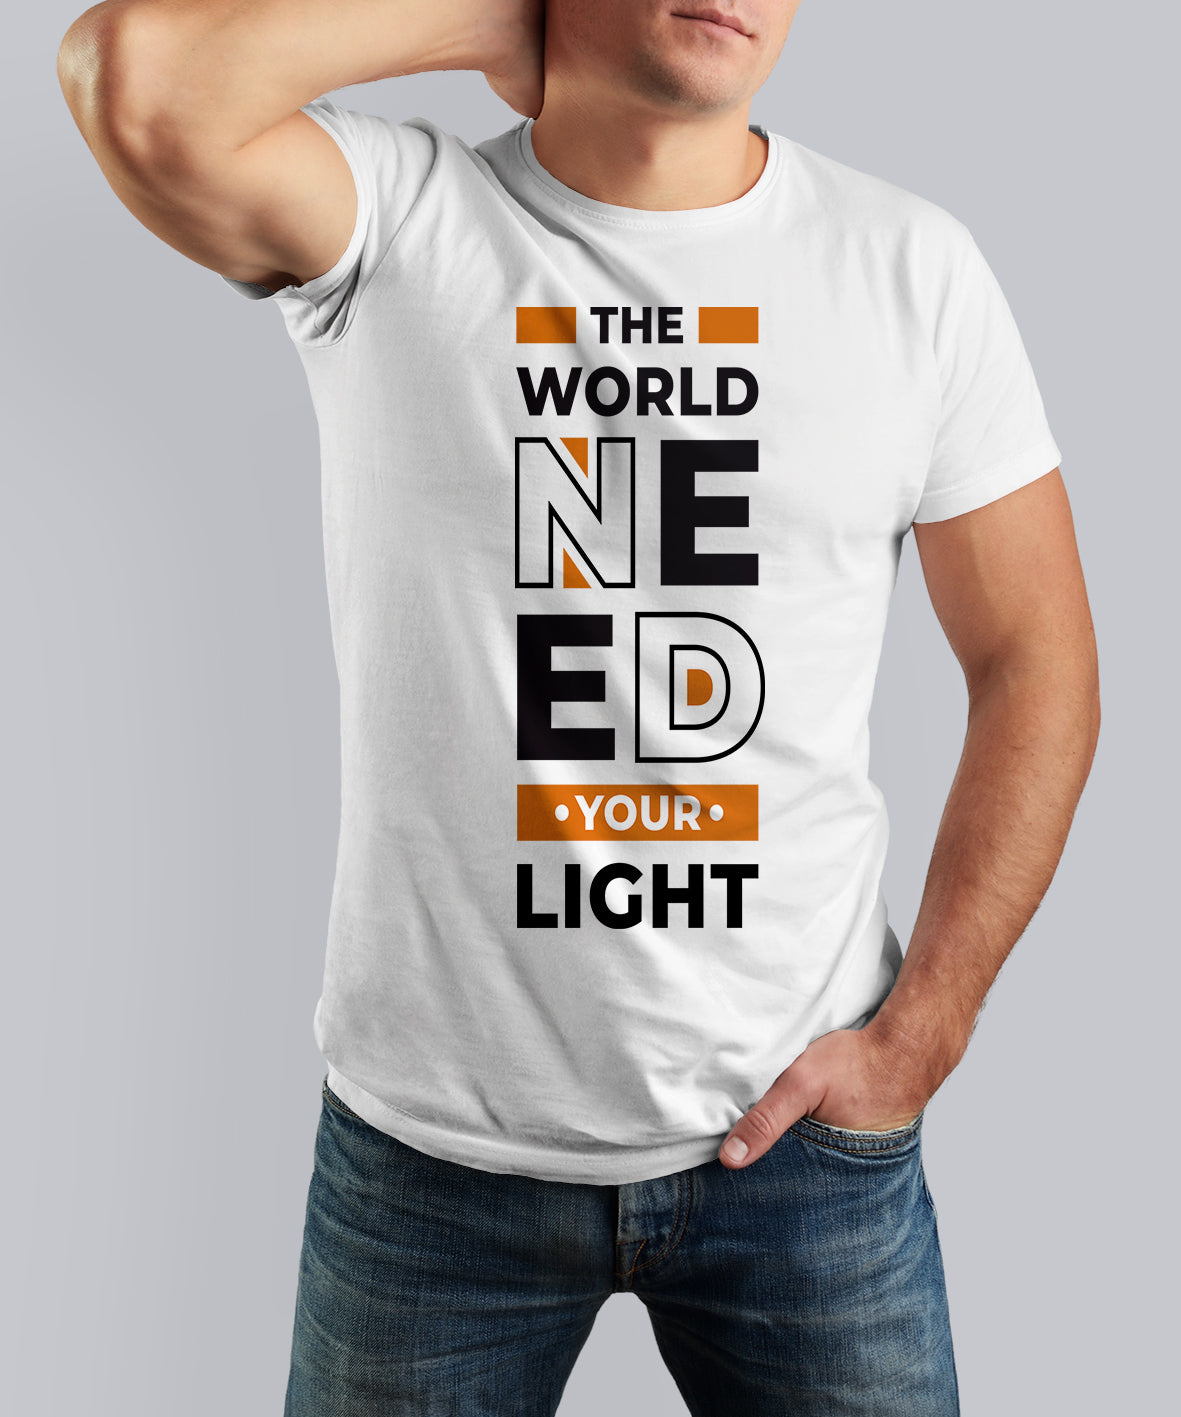 THE WORLD NEED YOUR LIGHT